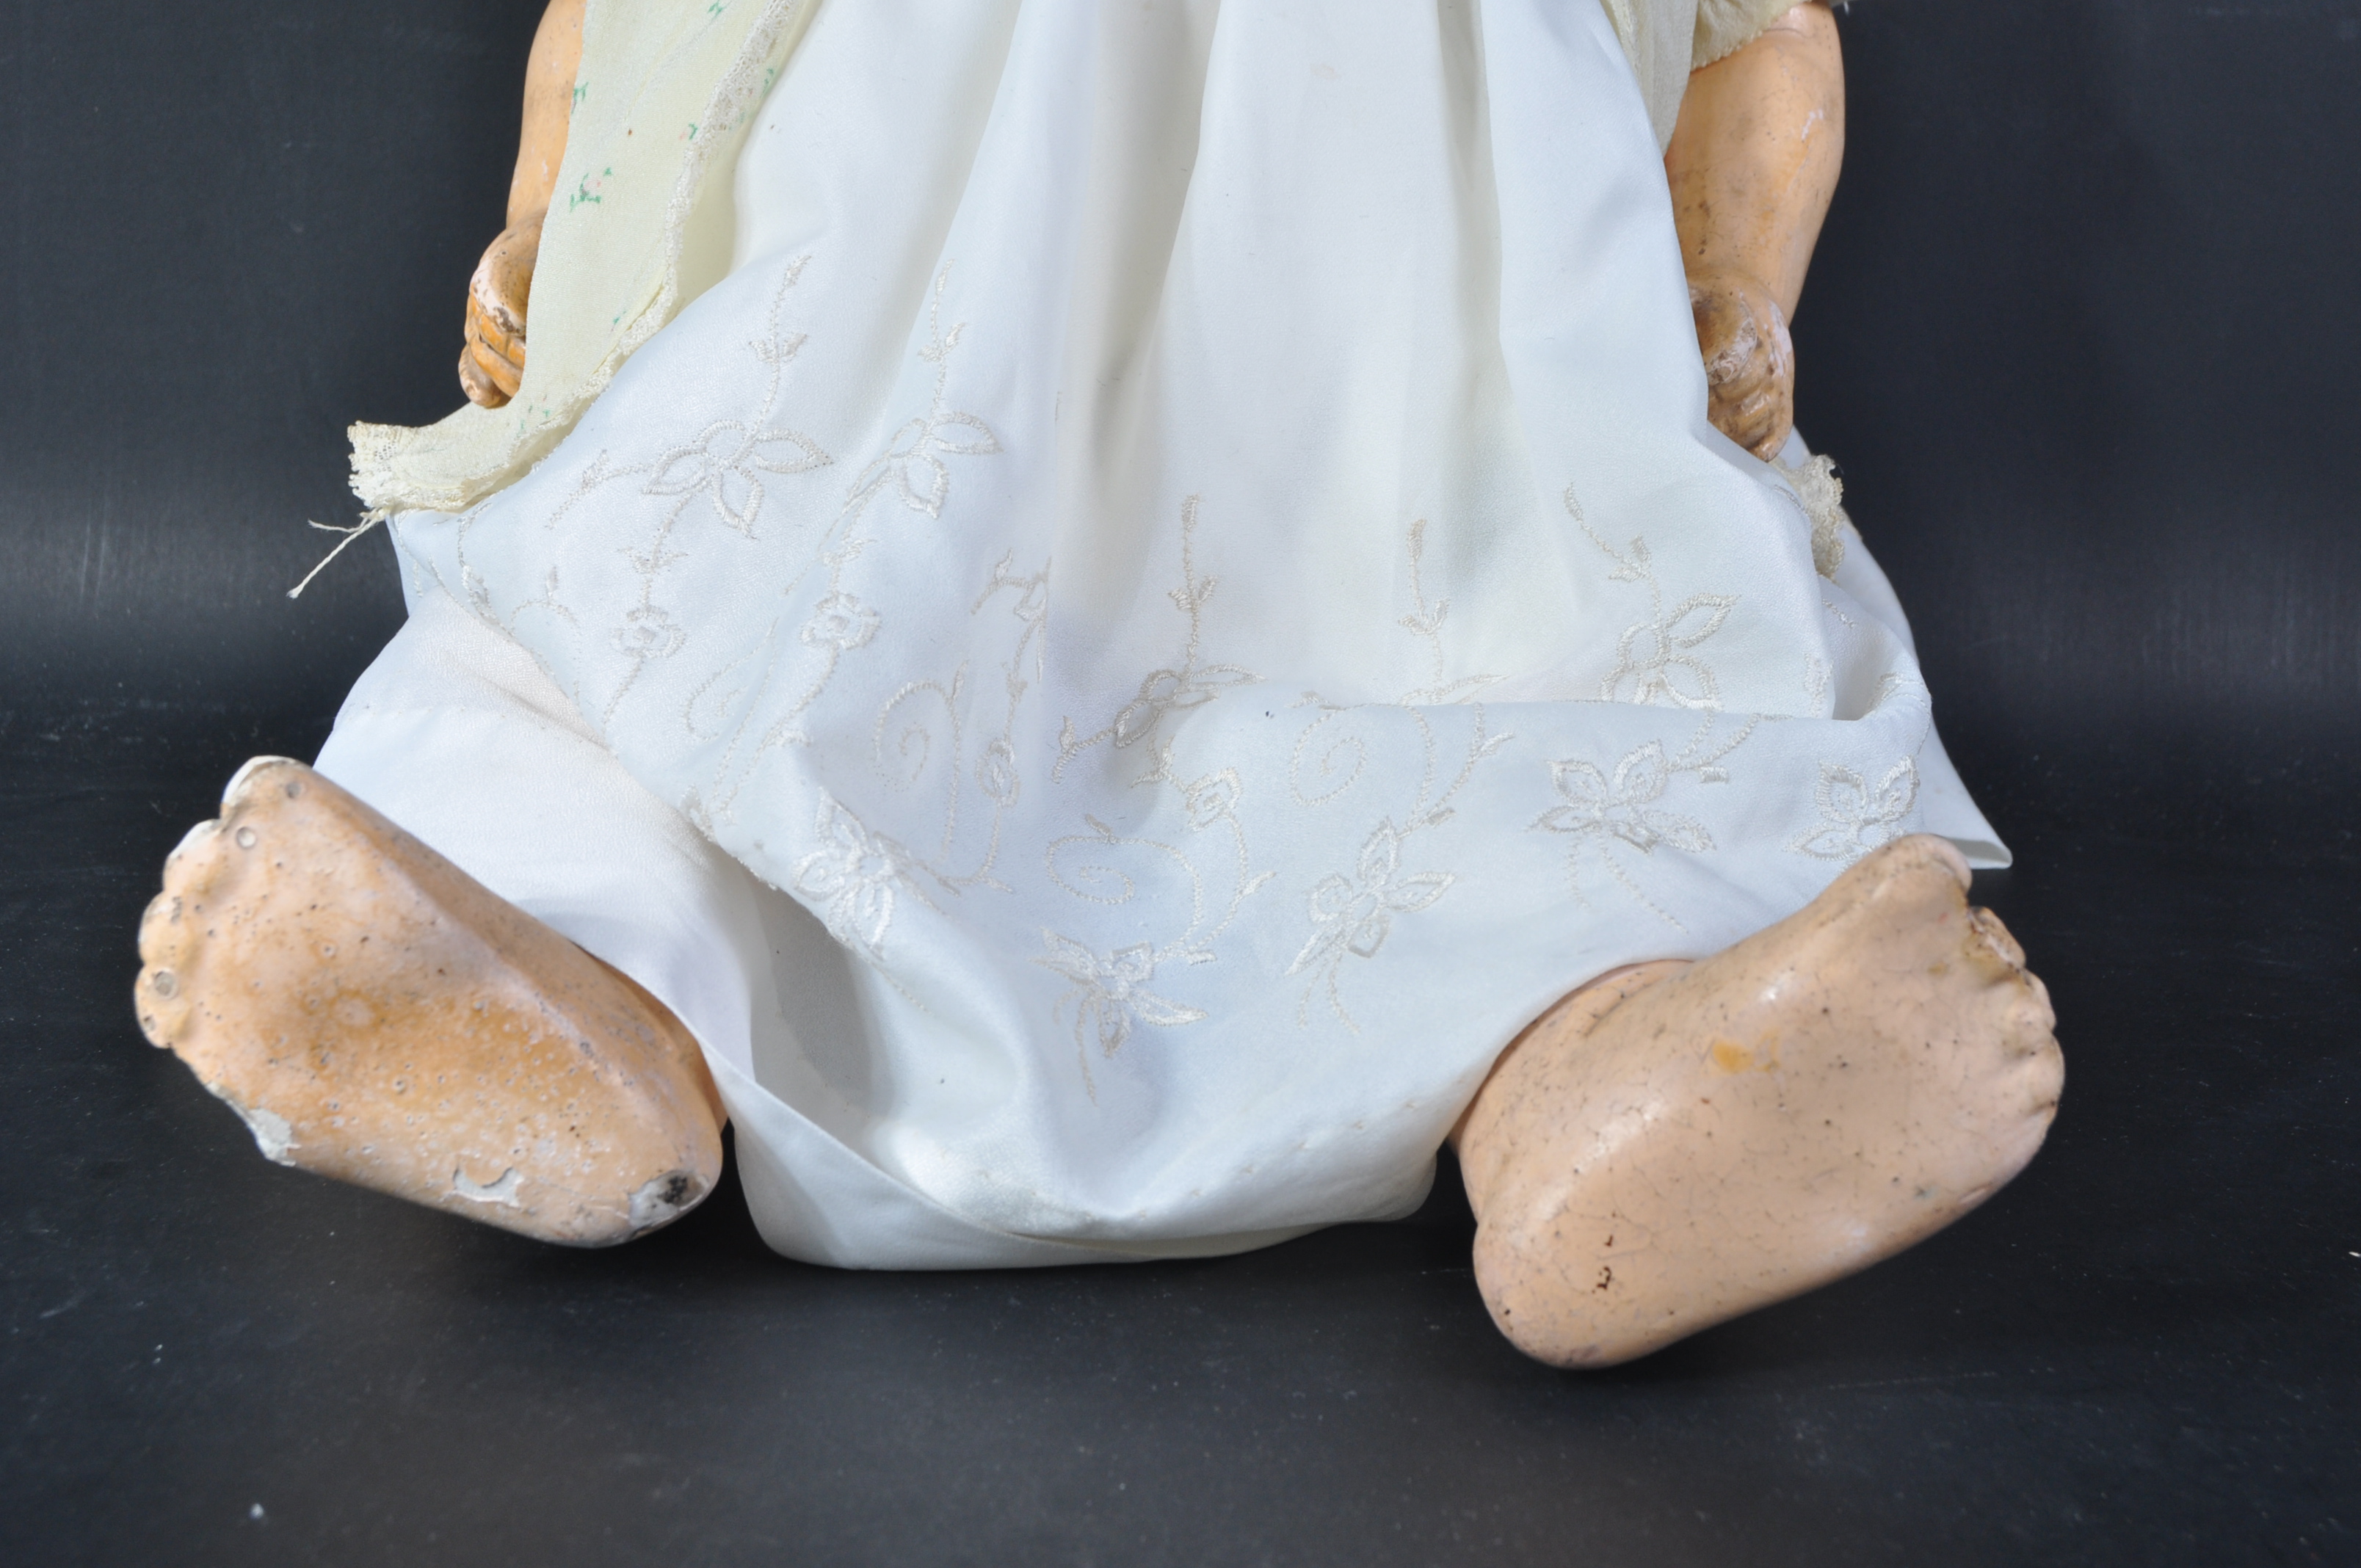 EARLY 20TH CENTURY BISQUE HEADED DOLL - Image 5 of 6